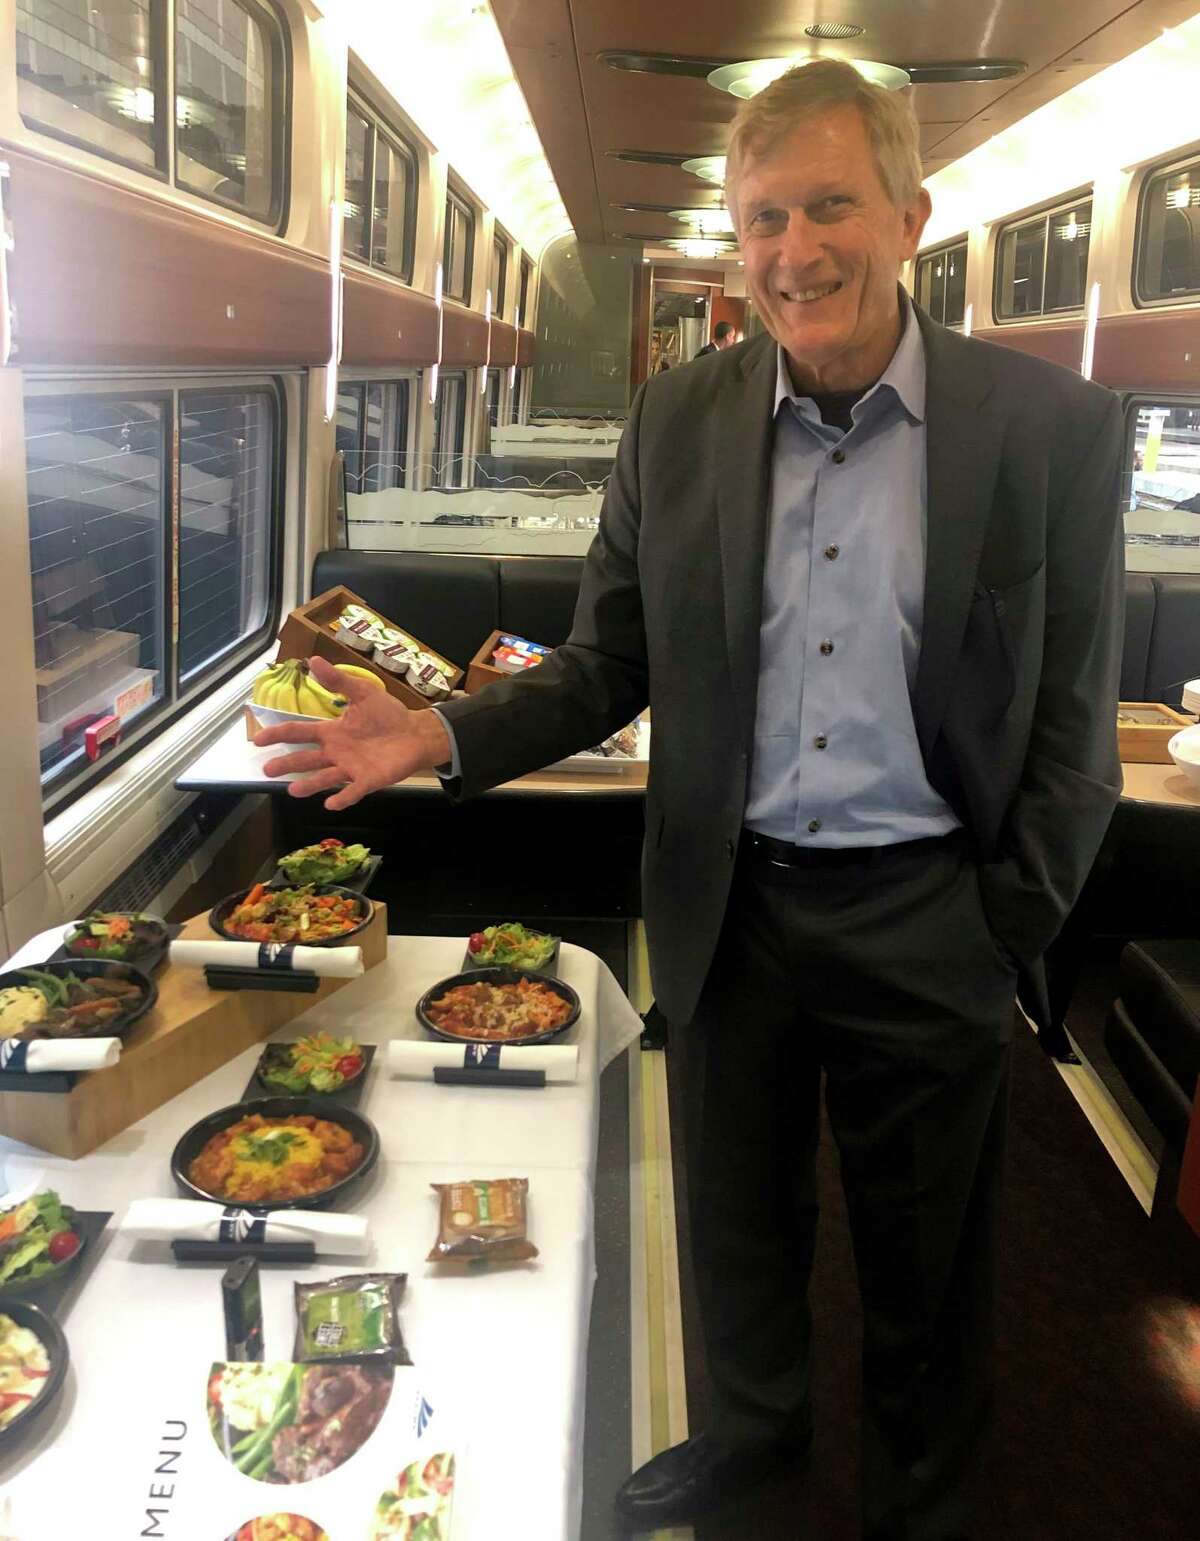 Amtrak rolling out new food options in effort to counter 'dumbed-down' image